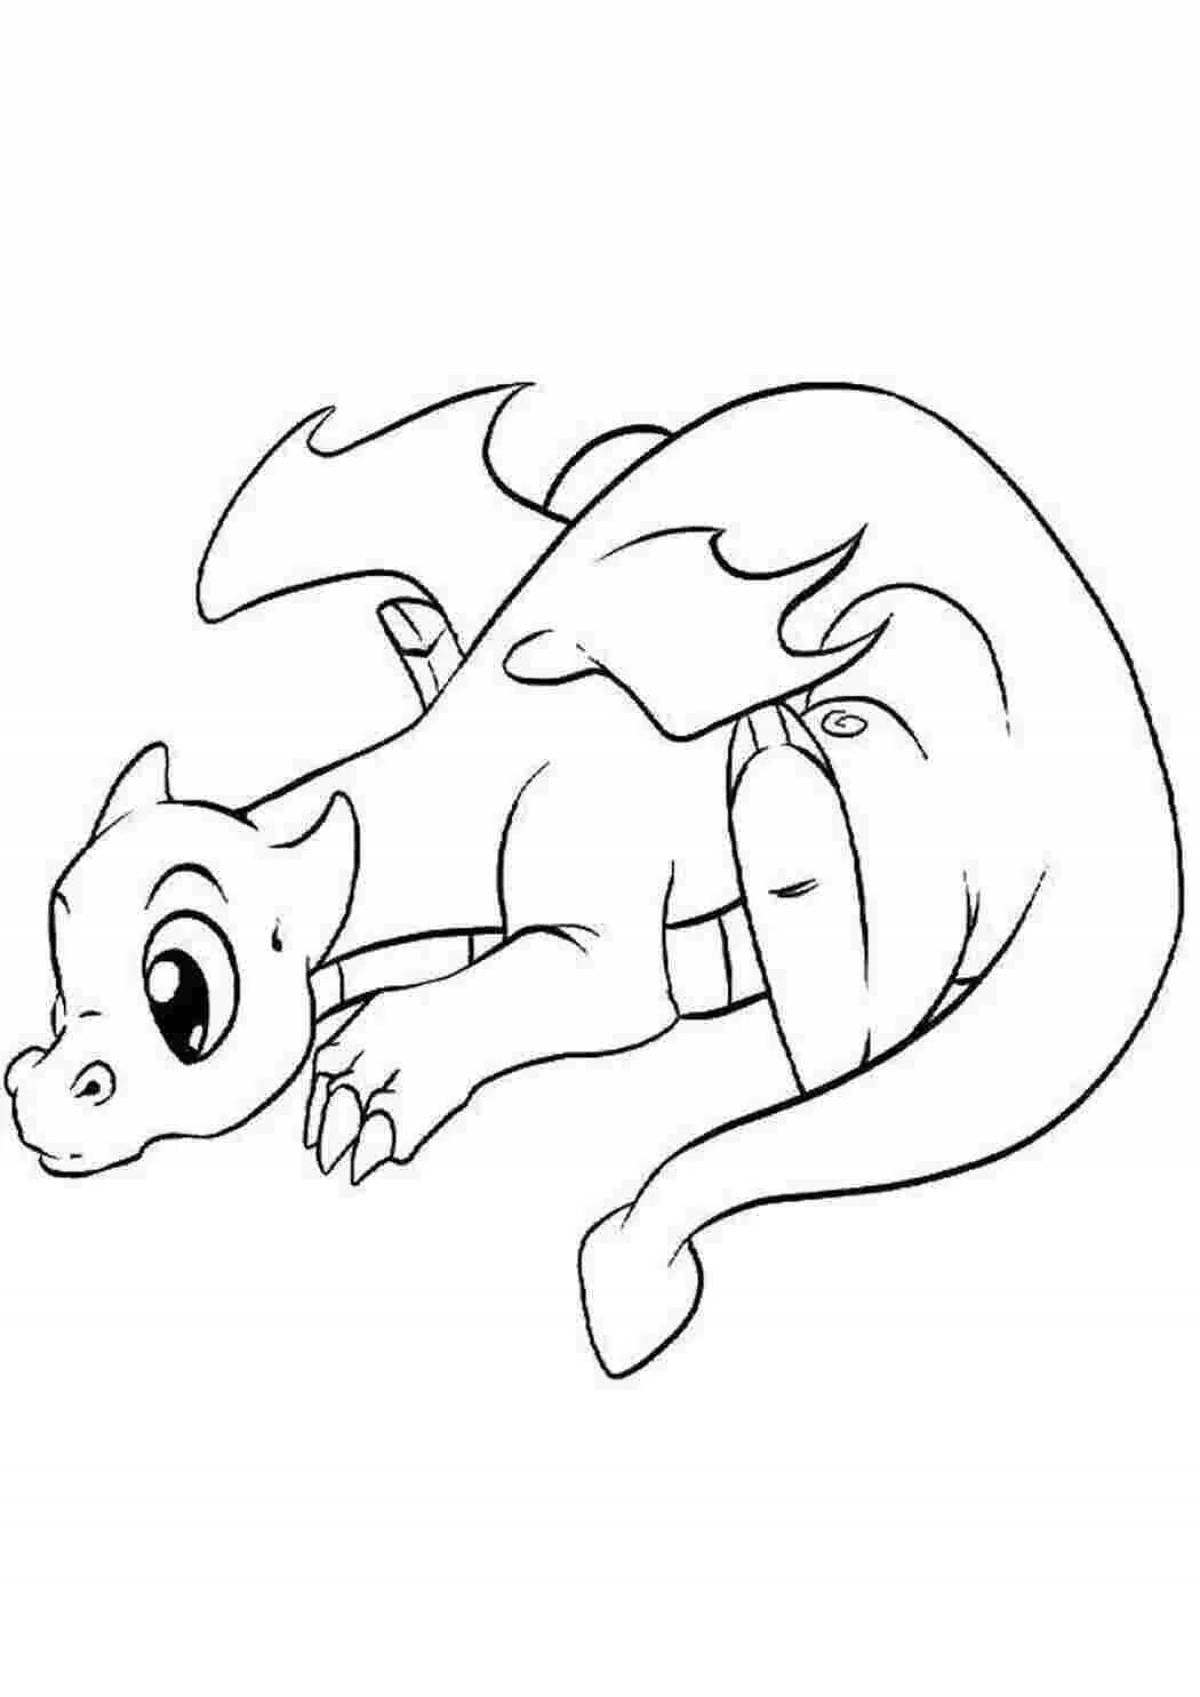 Cute and majestic dragon coloring book